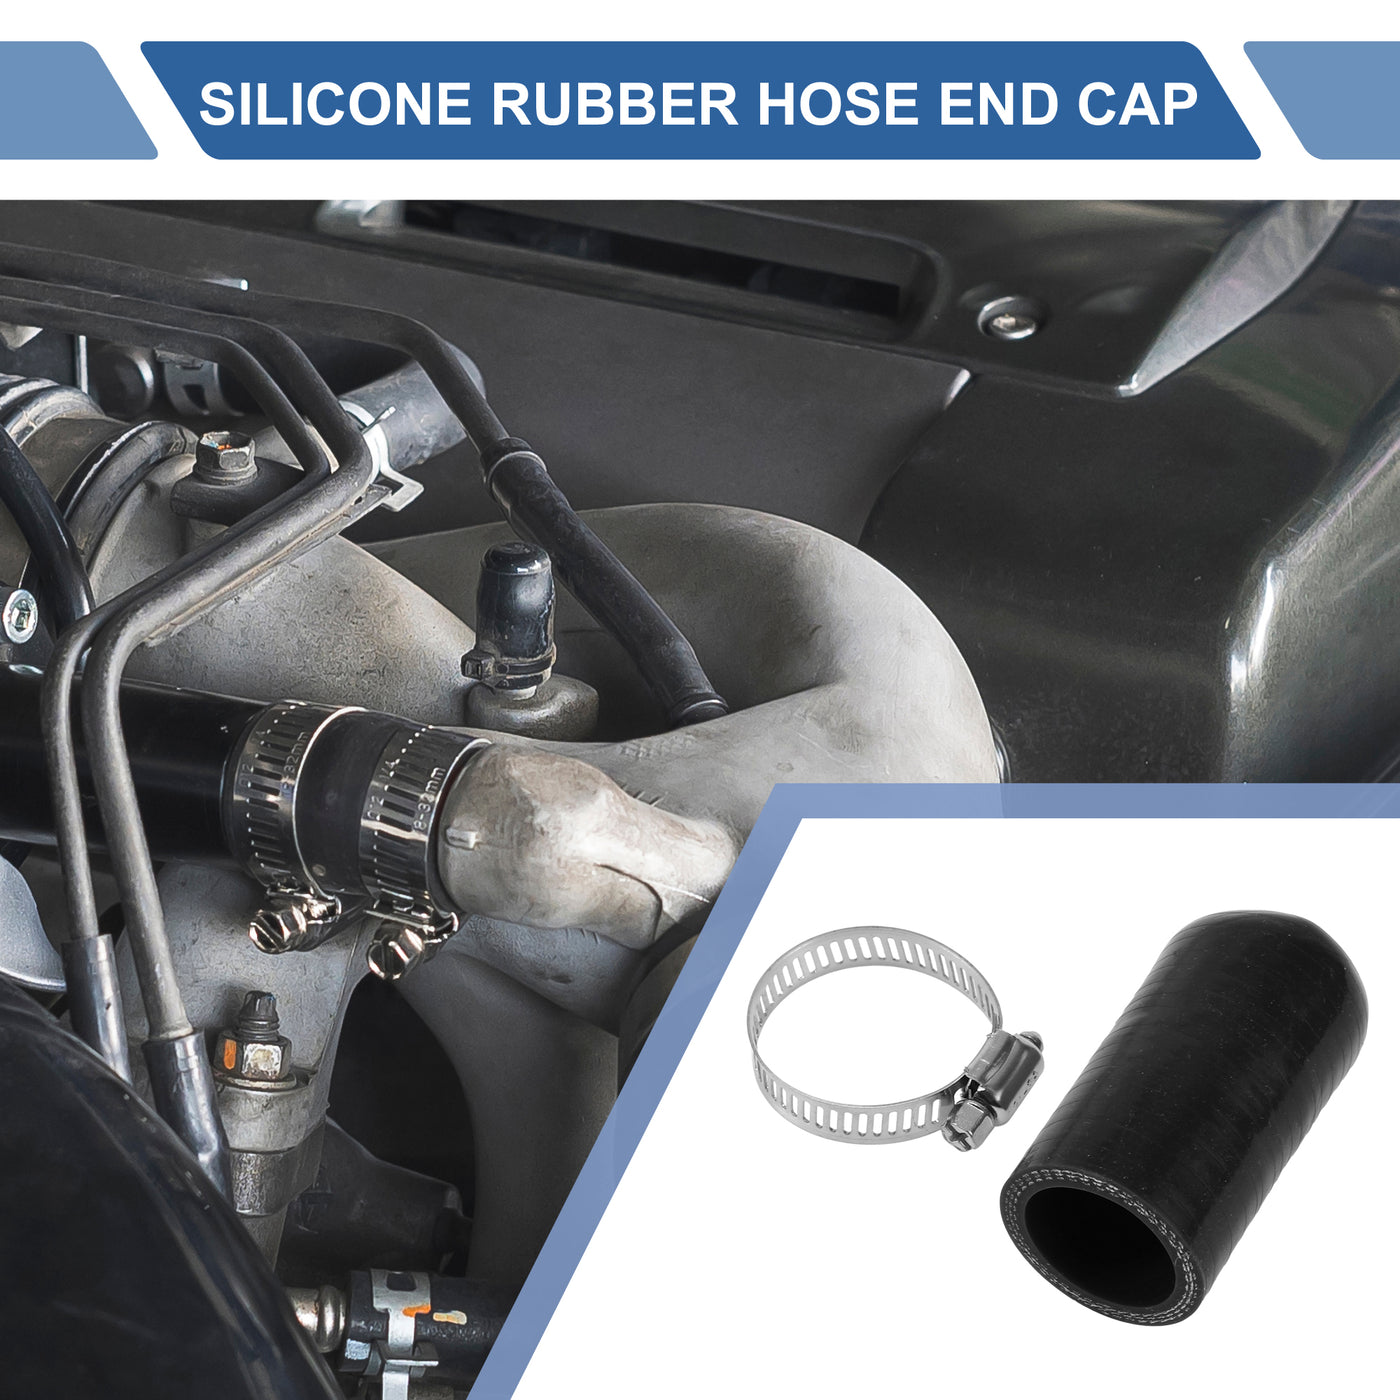 X AUTOHAUX 1 Pcs 60mm Length 28mm/1.10" ID Black Car Silicone Rubber Hose End Cap with Clamp Silicone Reinforced Blanking Cap for Bypass Tube Universal